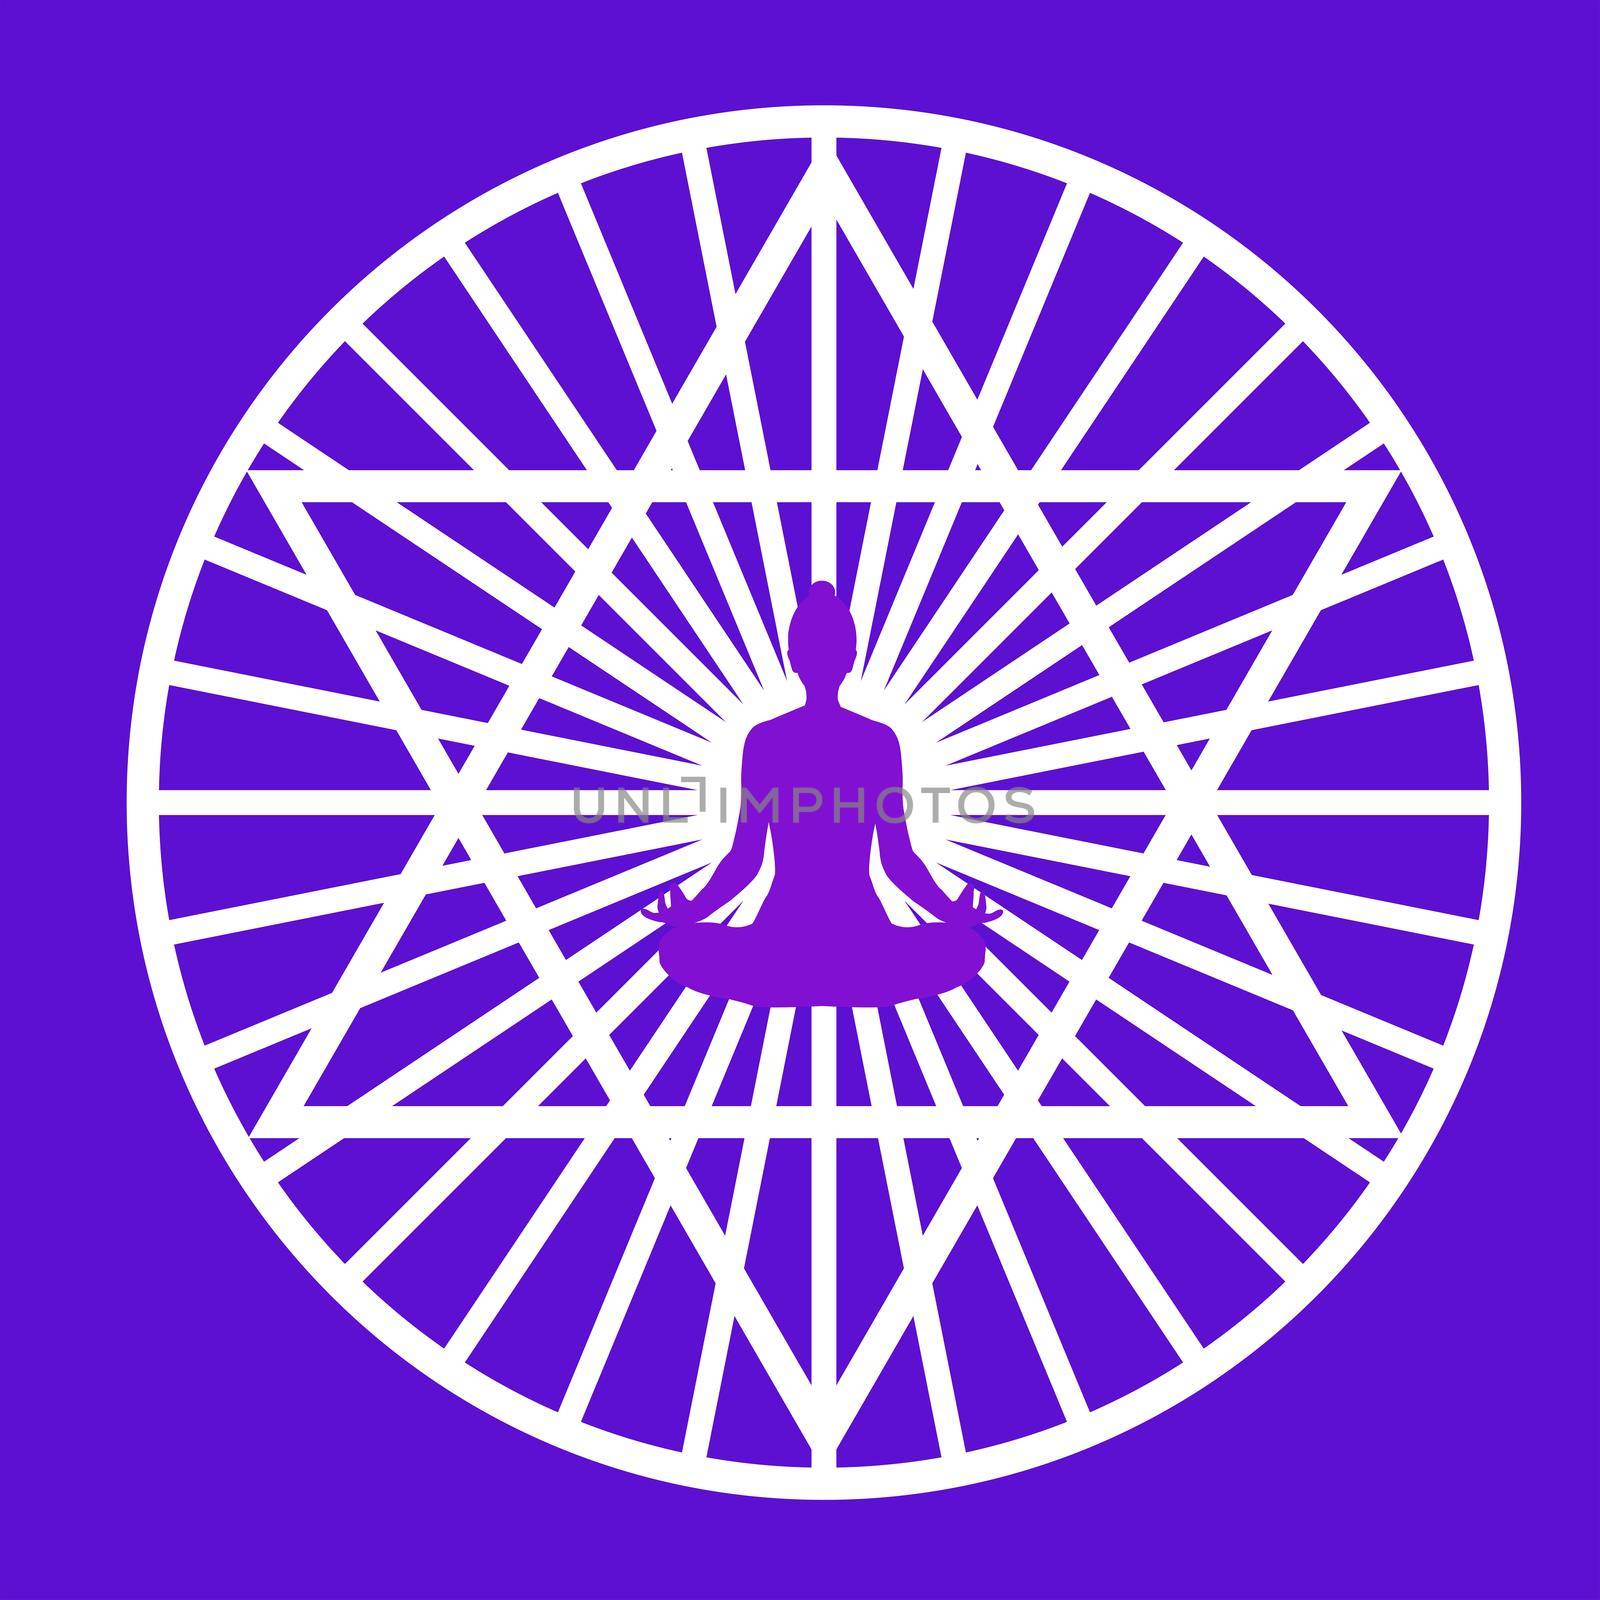 Silhouette of yogi in lotus position in a middle of a stylized pentagram symbol by hibrida13